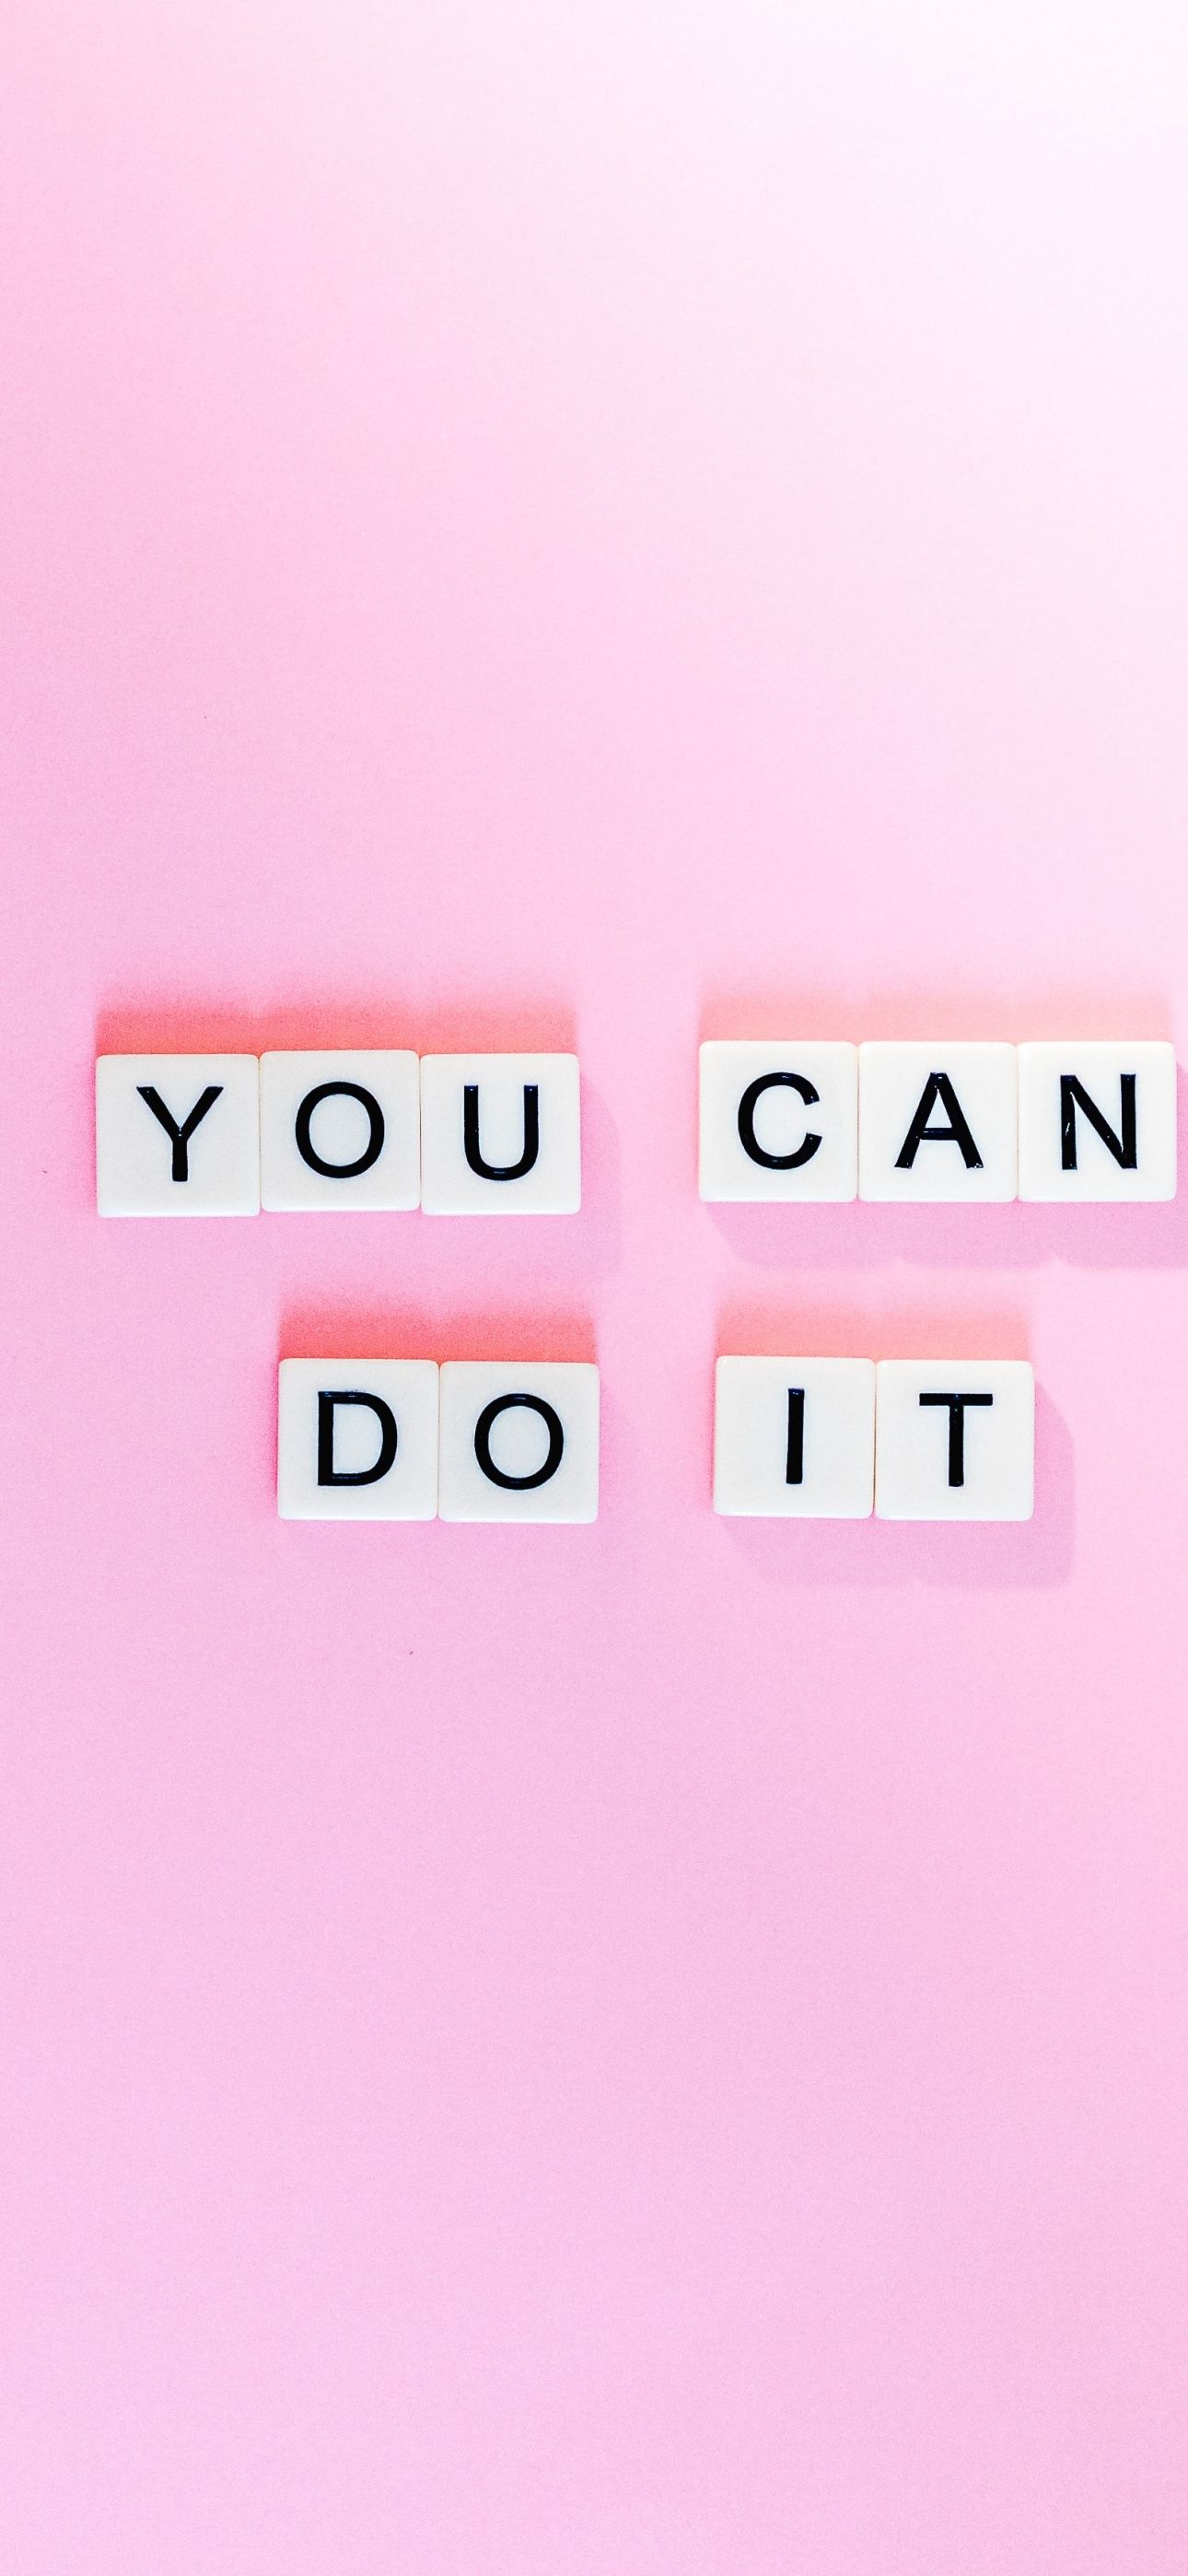 You can do it, motivational quote on pink background - Pink